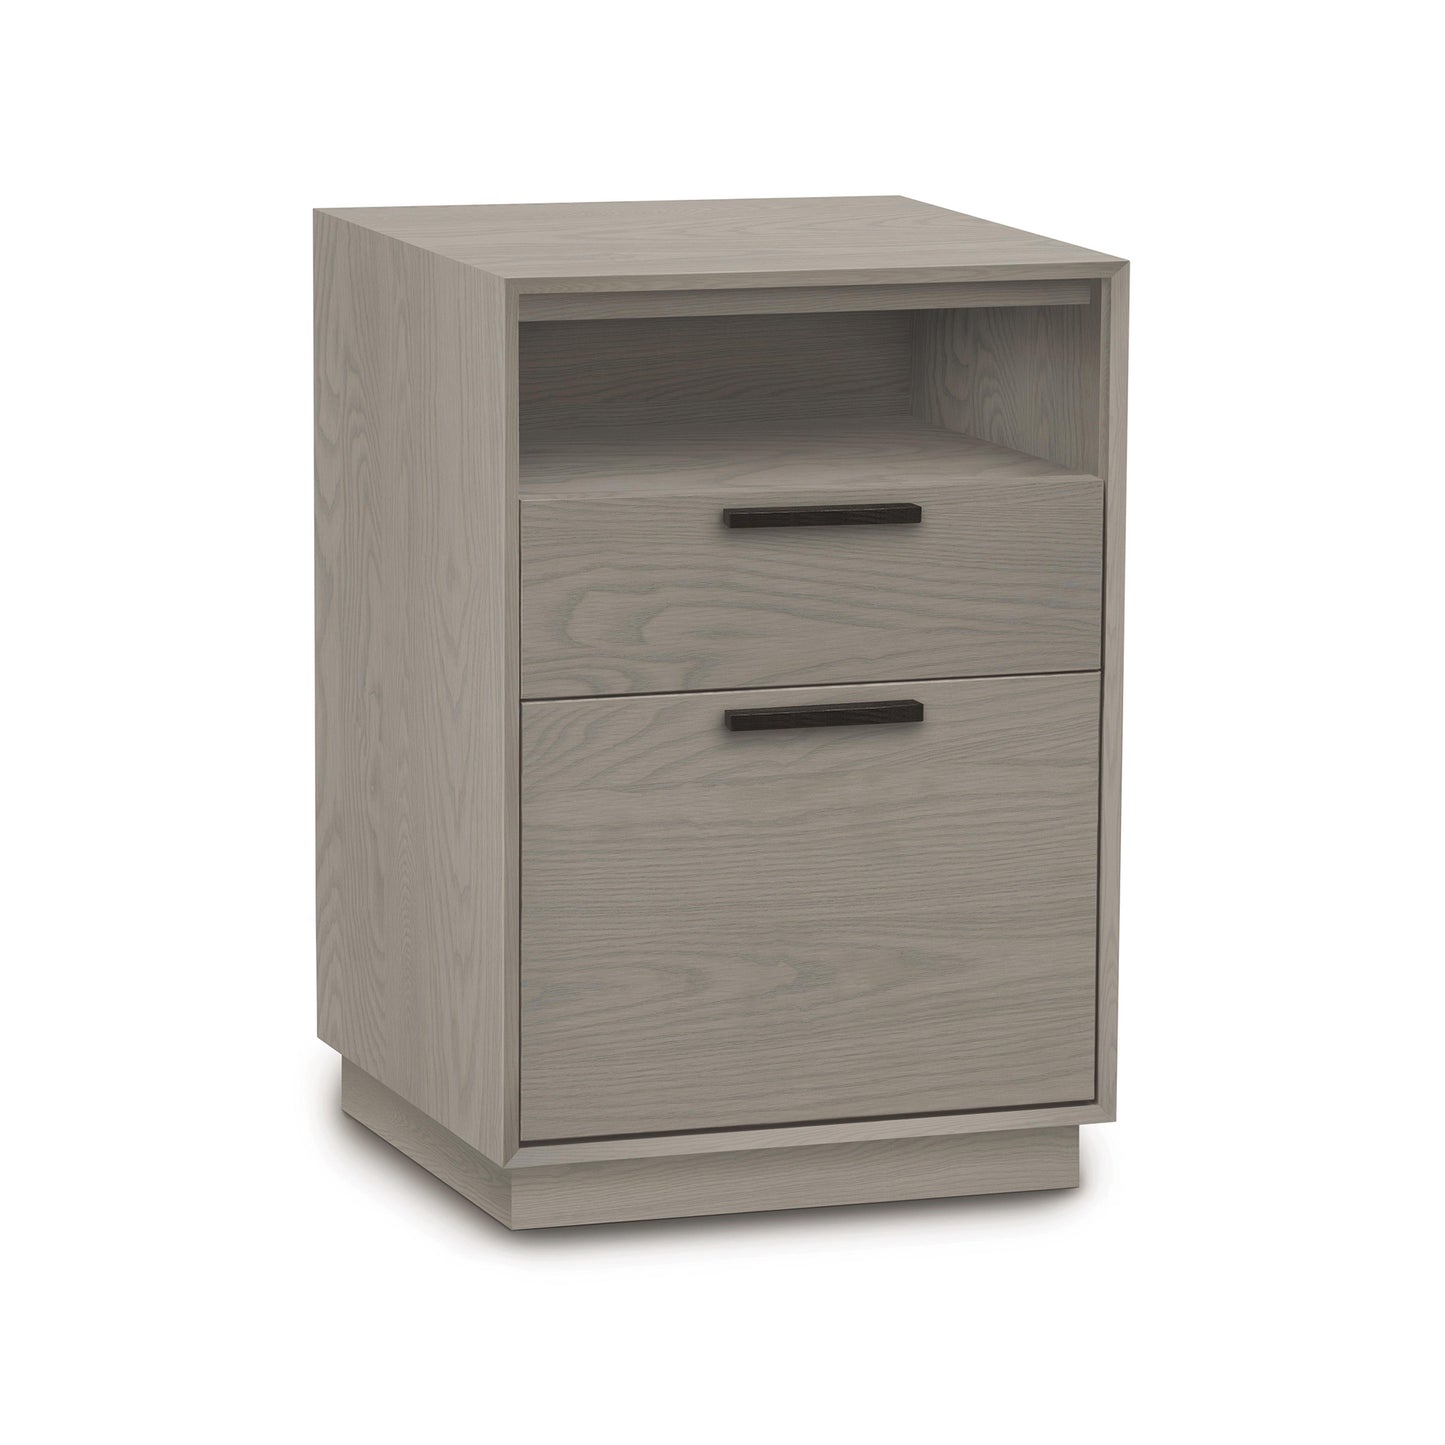 A modern solid wood construction gray two-drawer Copeland Furniture nightstand against a white background.